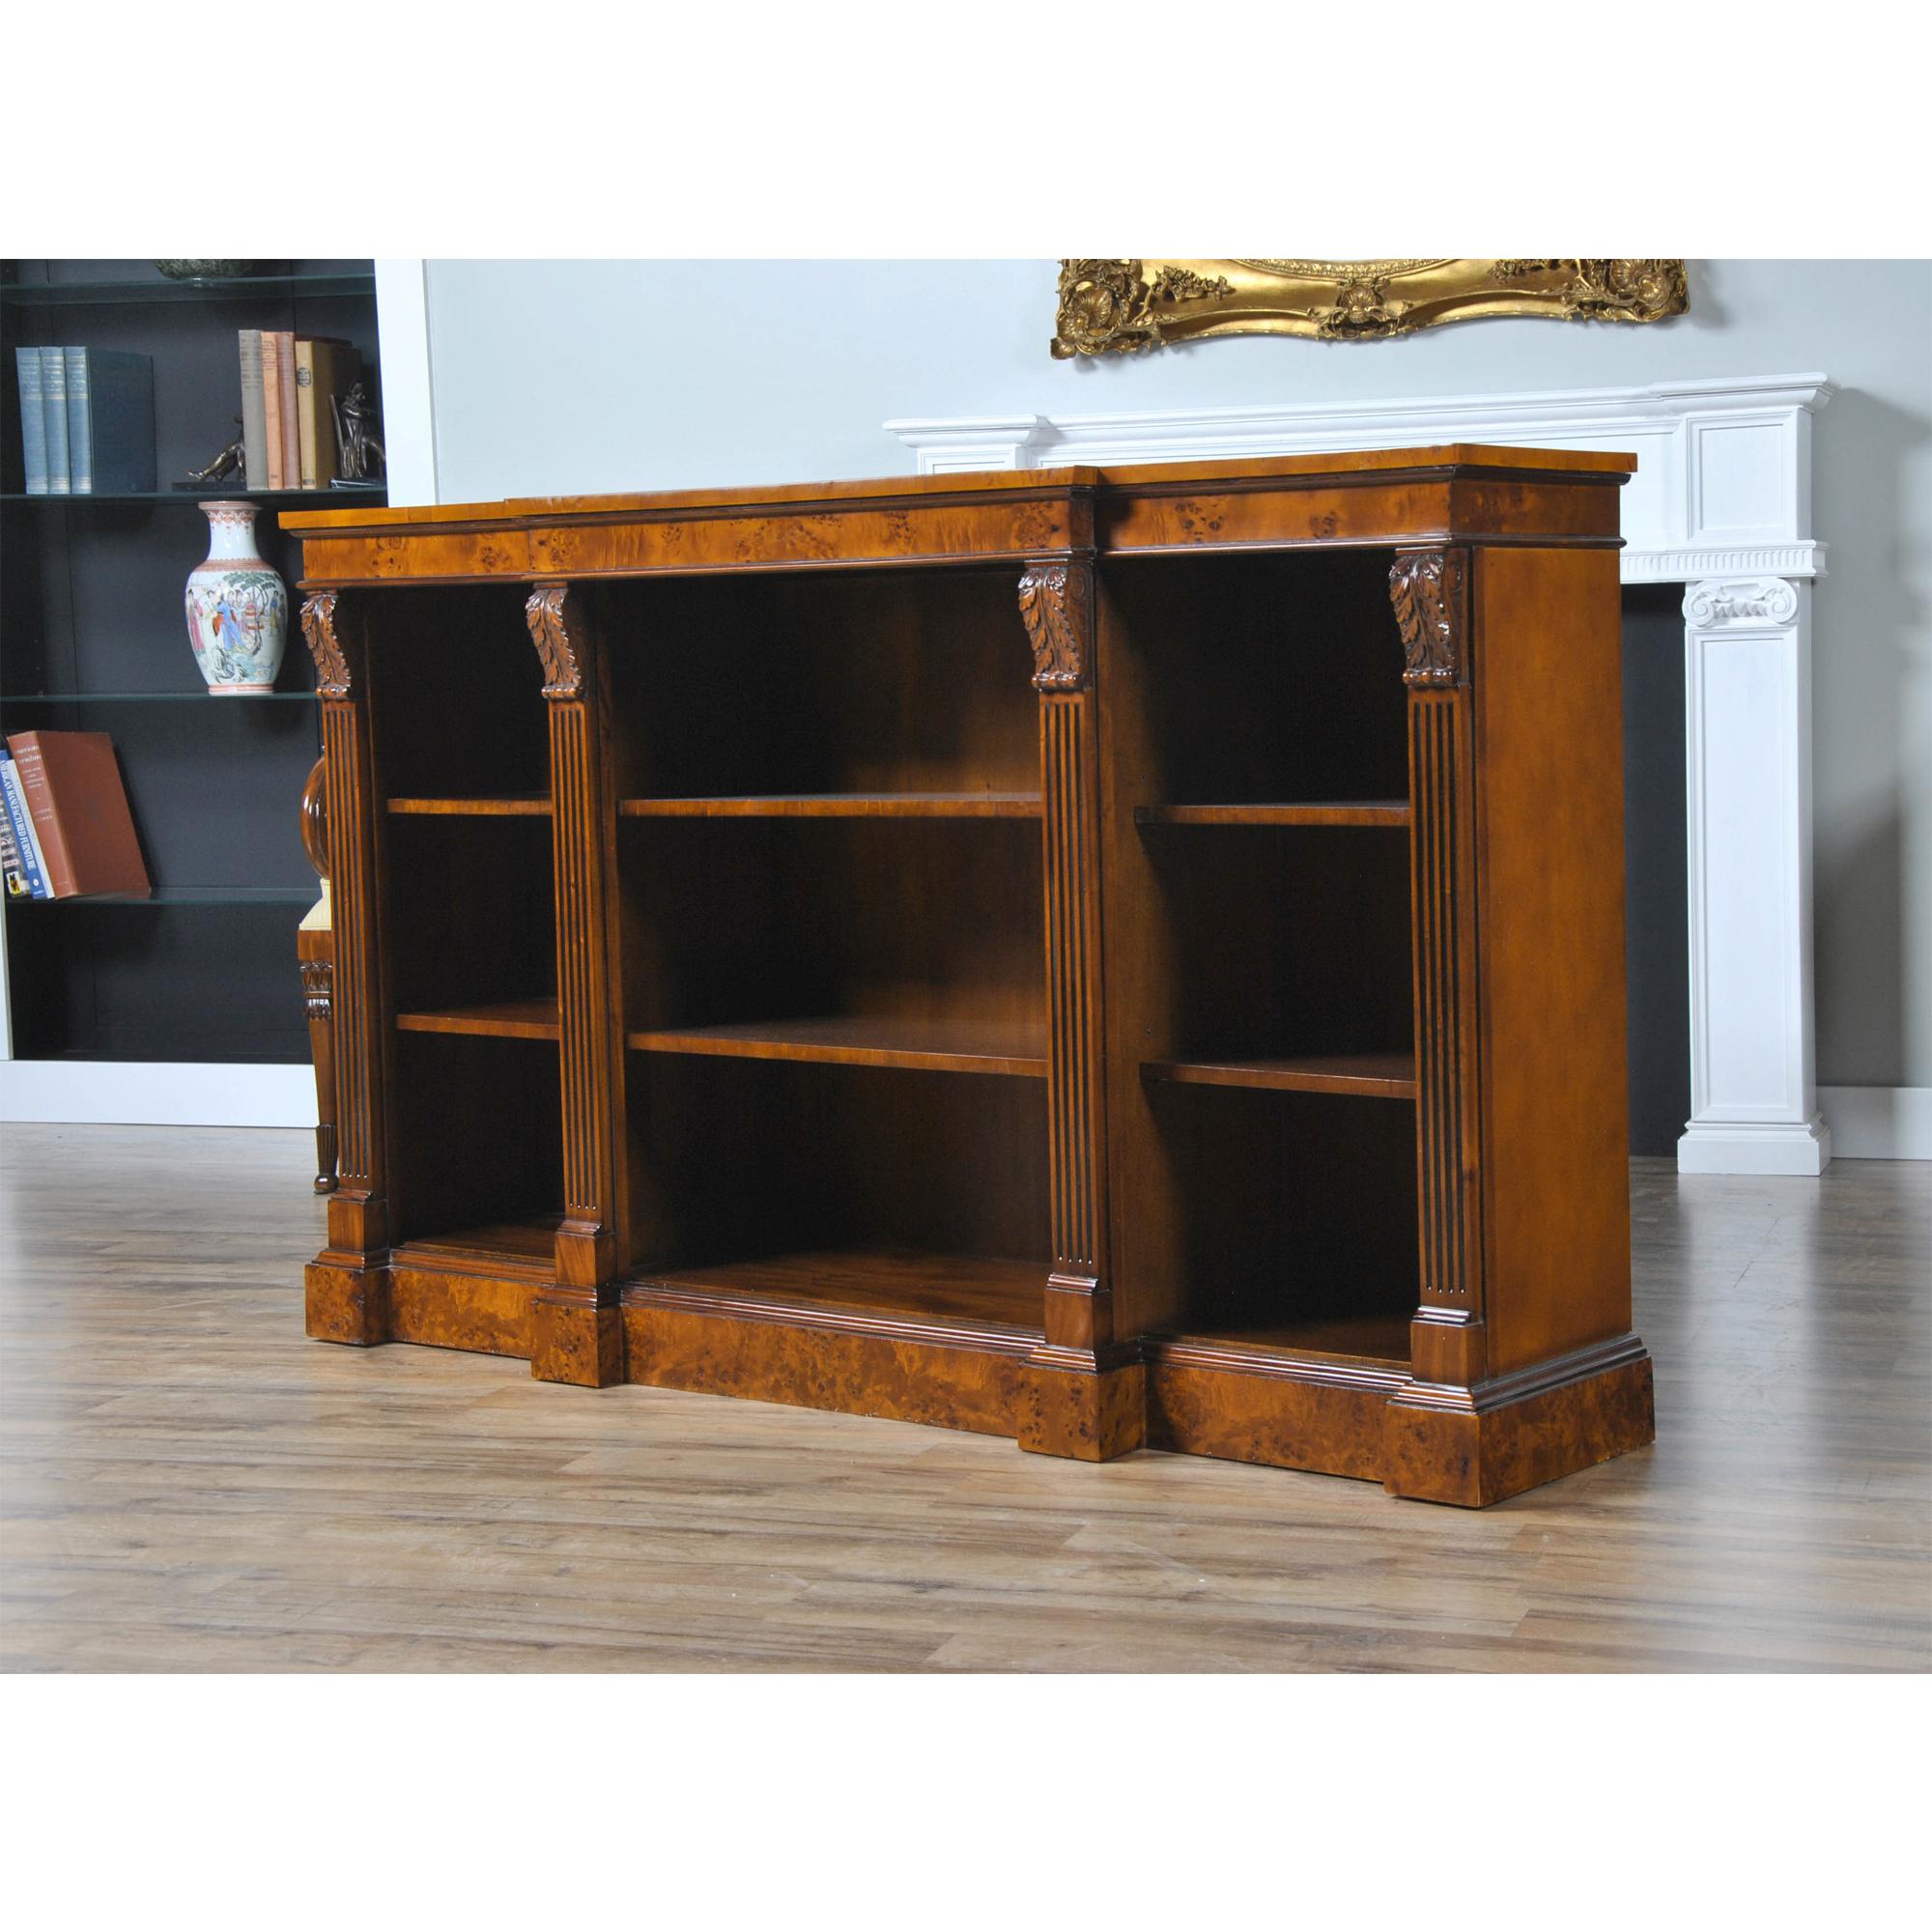 The Niagara Furniture Burled Penhurst Bookcase has a burled veneer top which is banded and supported by a burled cornice that is both beautiful and adds a sense of depth to the upper area of the case. The hand carved acanthus, solid mahogany